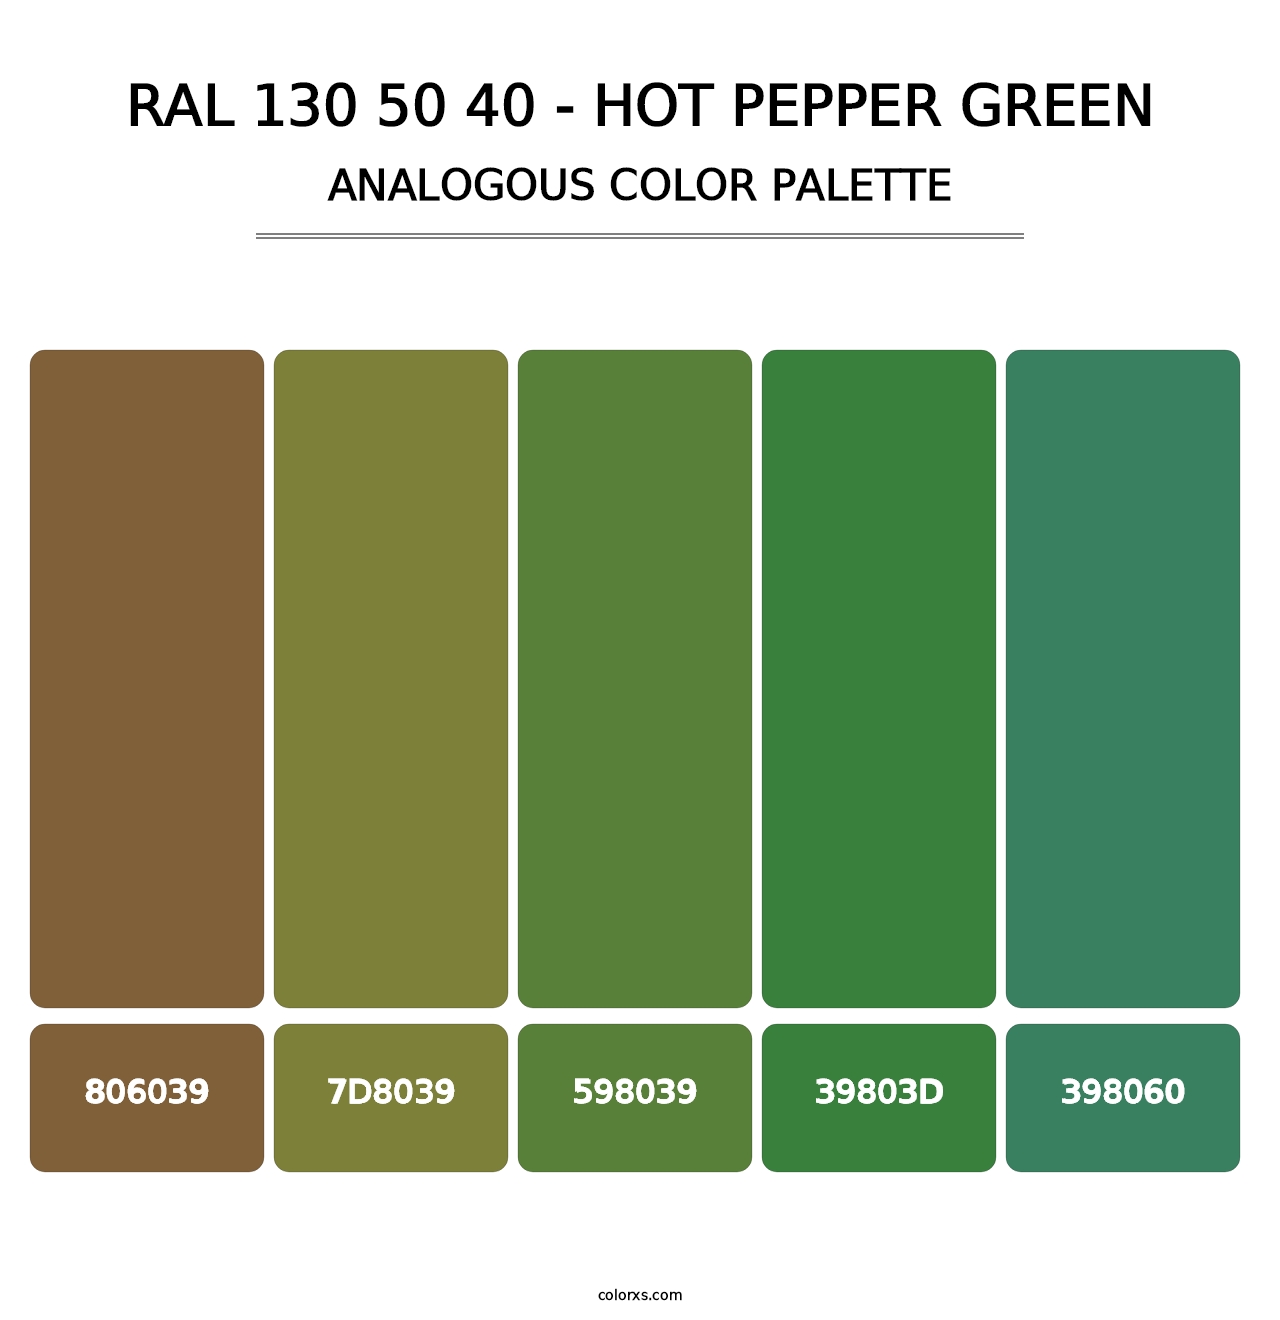 RAL 130 50 40 - Hot Pepper Green - Analogous Color Palette